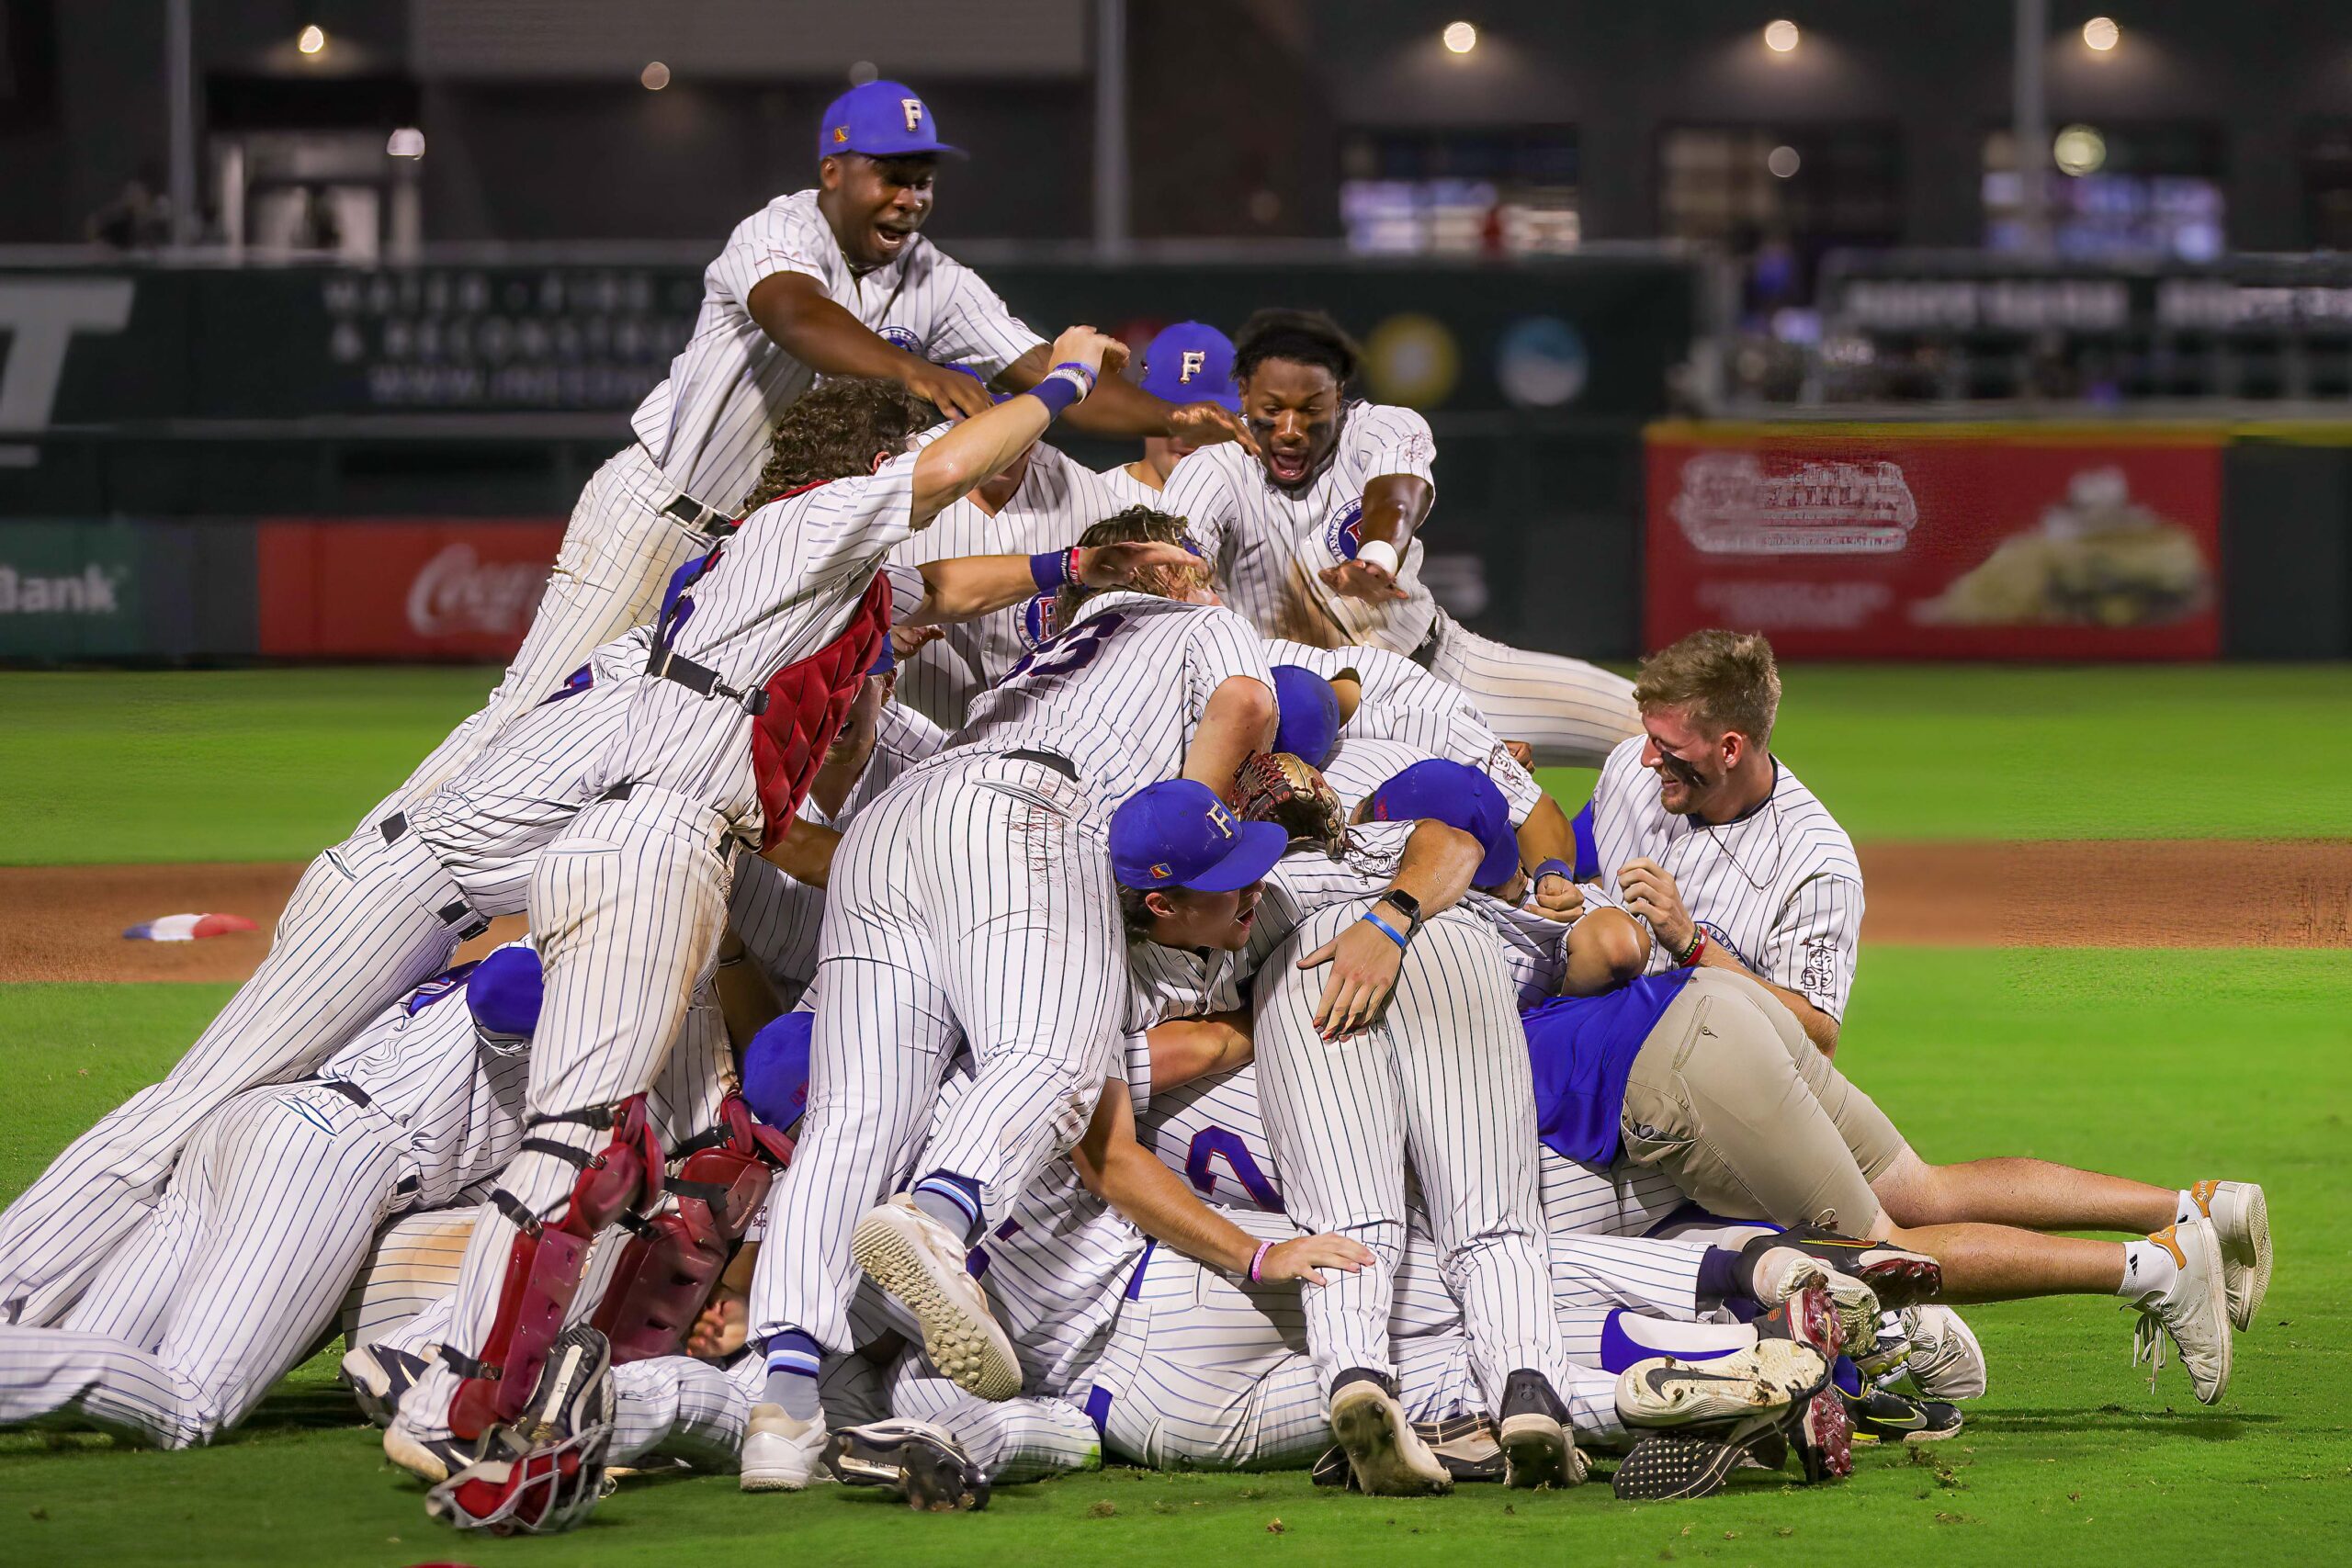 http://Baseball%20players%20in%20a%20dogpile